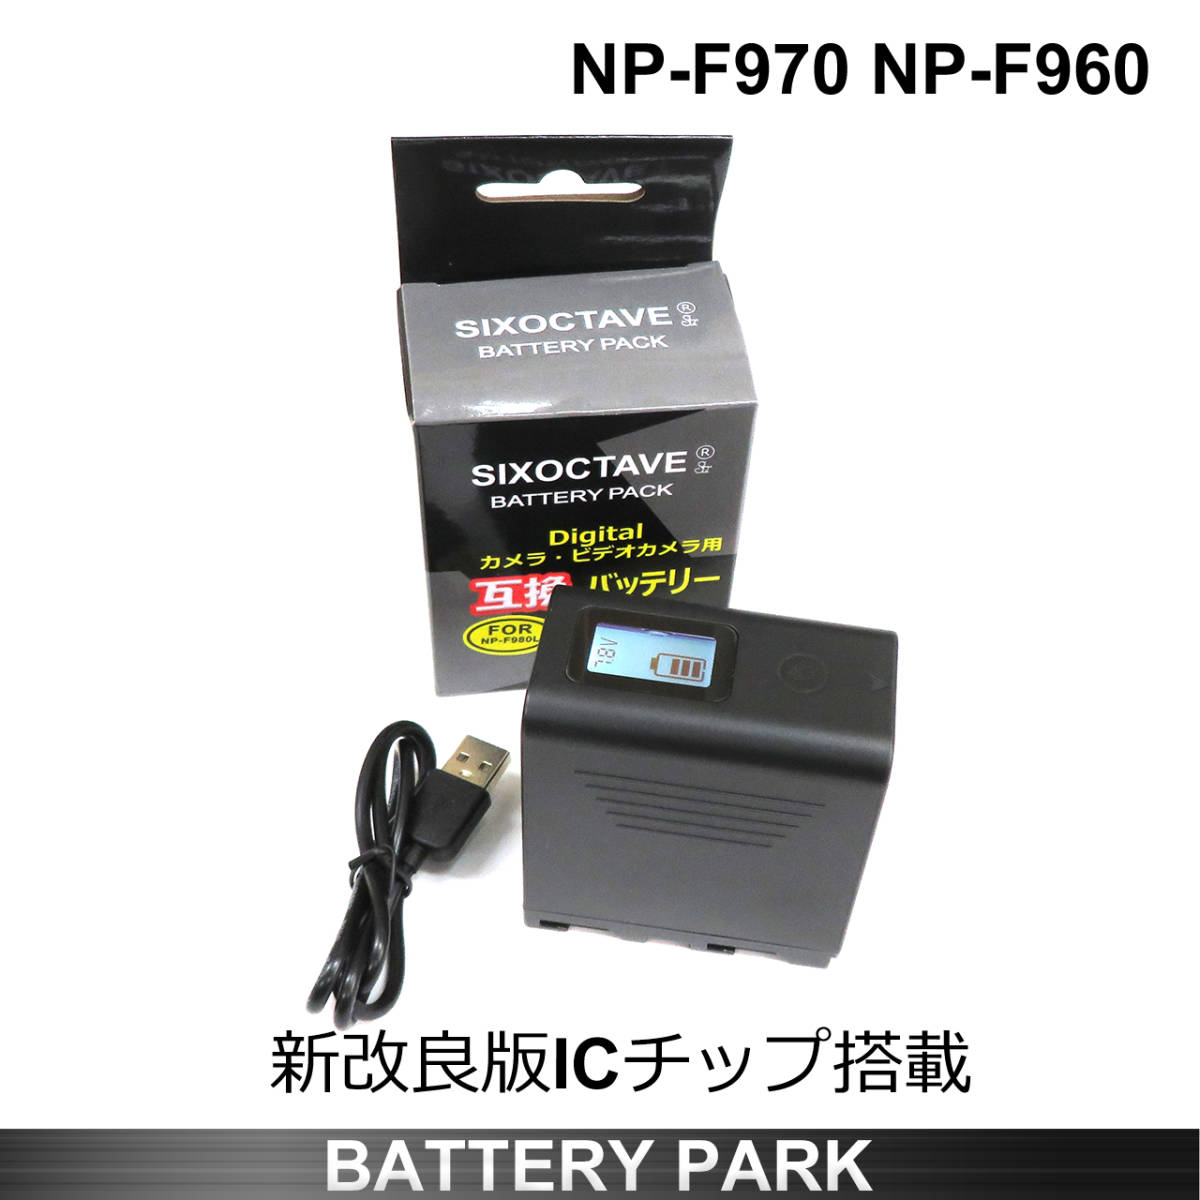 NP-F950 NP-F960 NP-F970 互換バッテリー ソニー SONY HDR-FX1/HVR-Z7J/HVR-Z5J/HVR-V1J/HVR-HD100J/HXR-NX5J HDR-AX2000/HDR-FX7_画像1